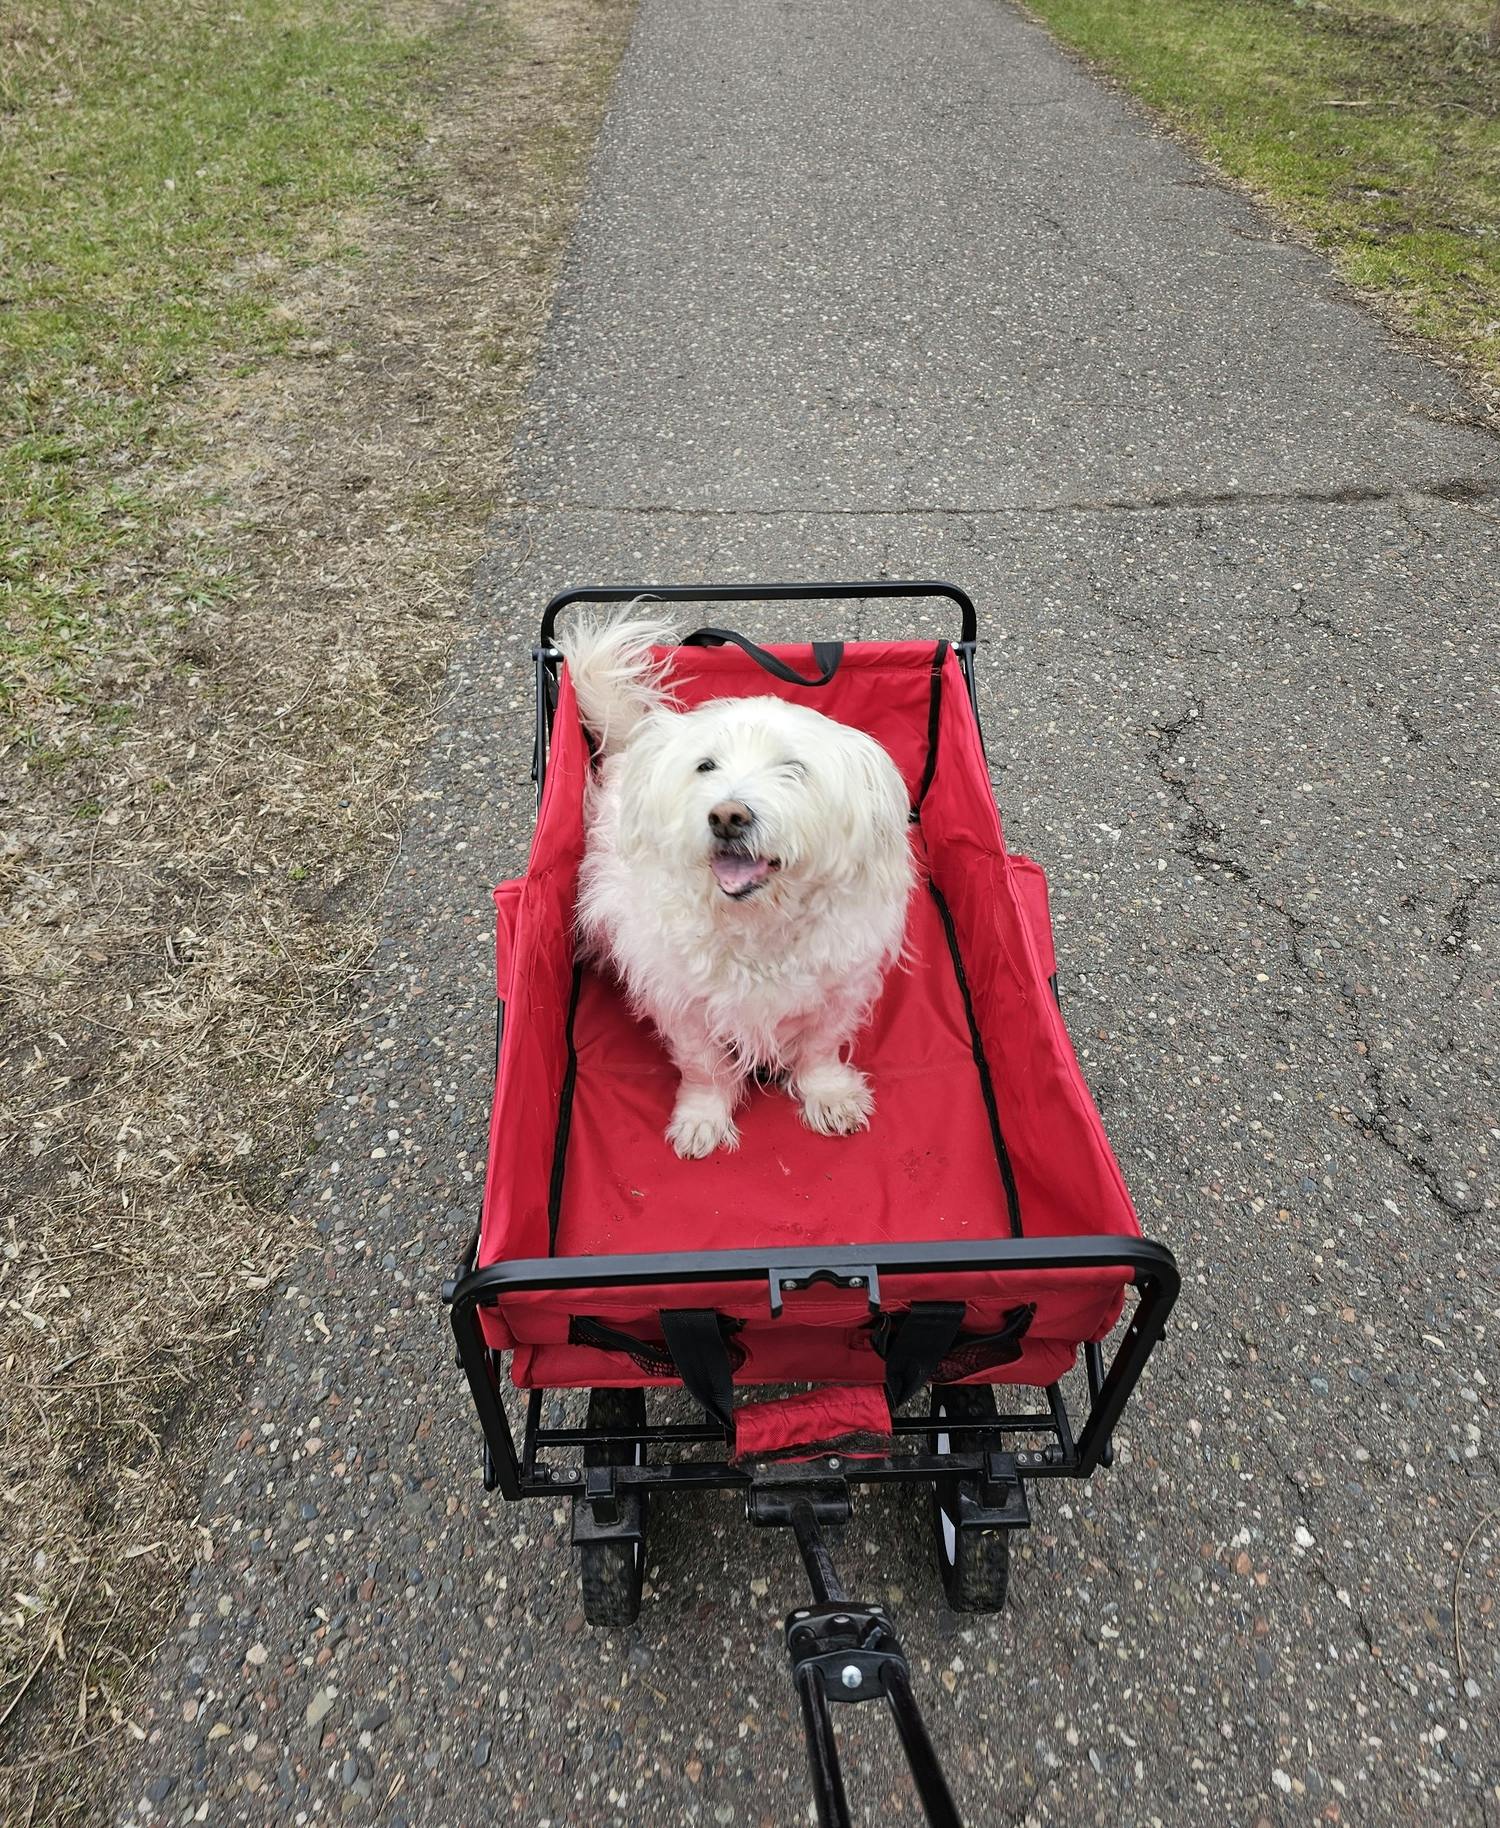 Roxy going for a ride in her red wagon